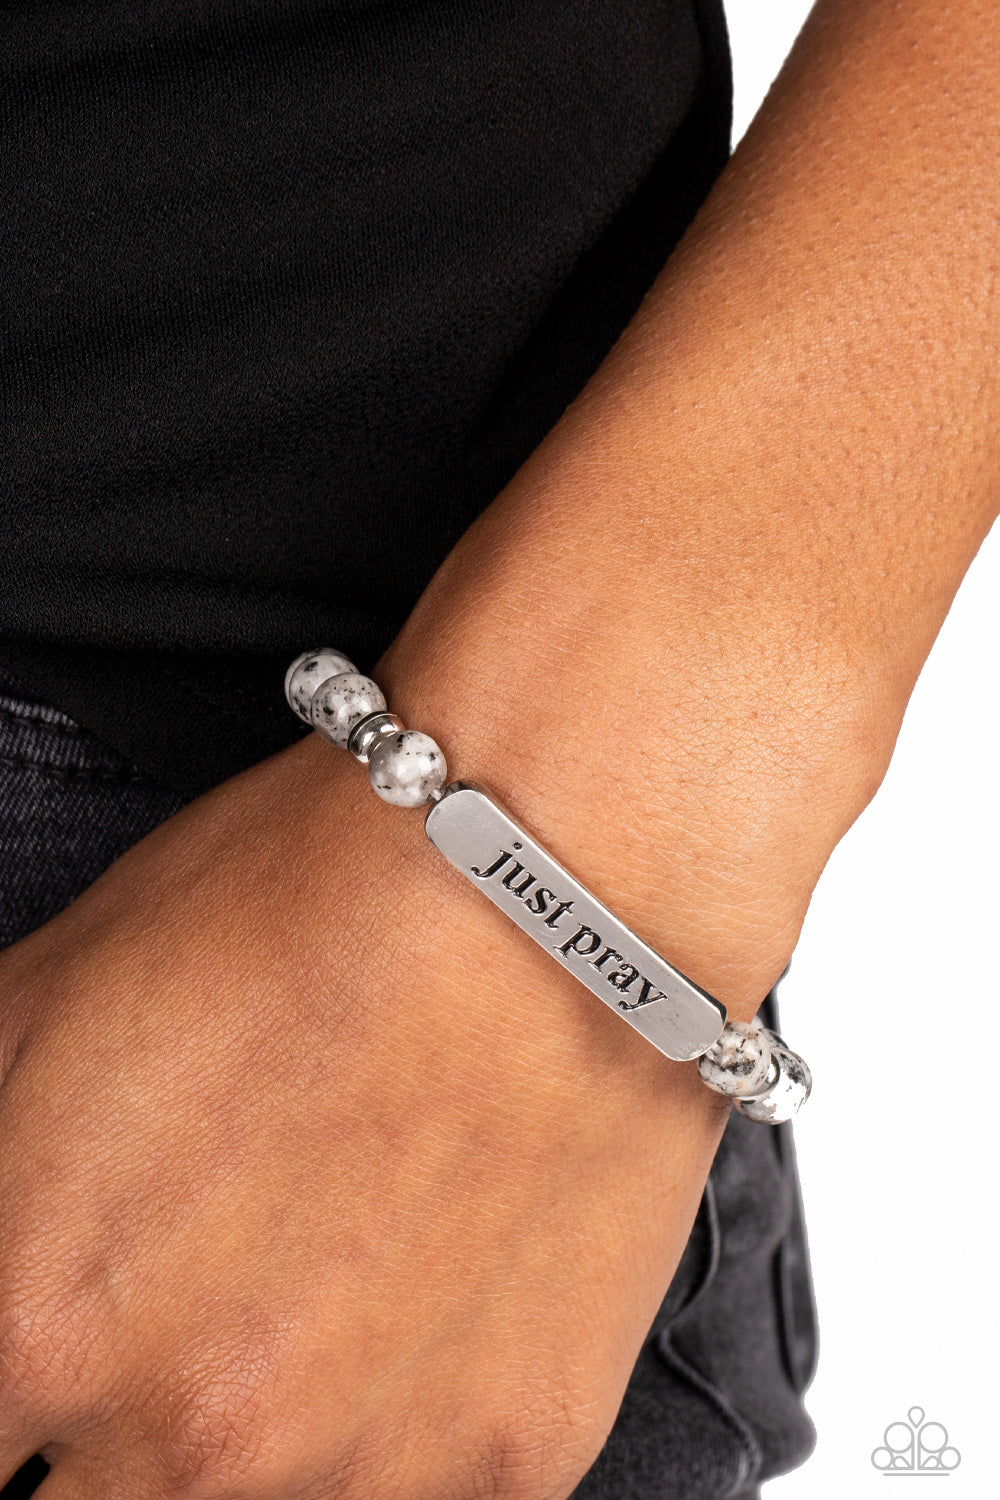 Just Pray - Silver - Gray Stone Bracelet - Paparazzi Accessories - Smooth, gray speckled stones are stretched across the wrist on an elastic stretchy band, with accents of silver beads sprinkled in. Meeting in the center of the stony display, a curved rectangular bar is stamped with the phrase "just pray" for an inspiring finish. As the stone elements in this piece are natural, some color variation is normal. Sold as one individual bracelet.